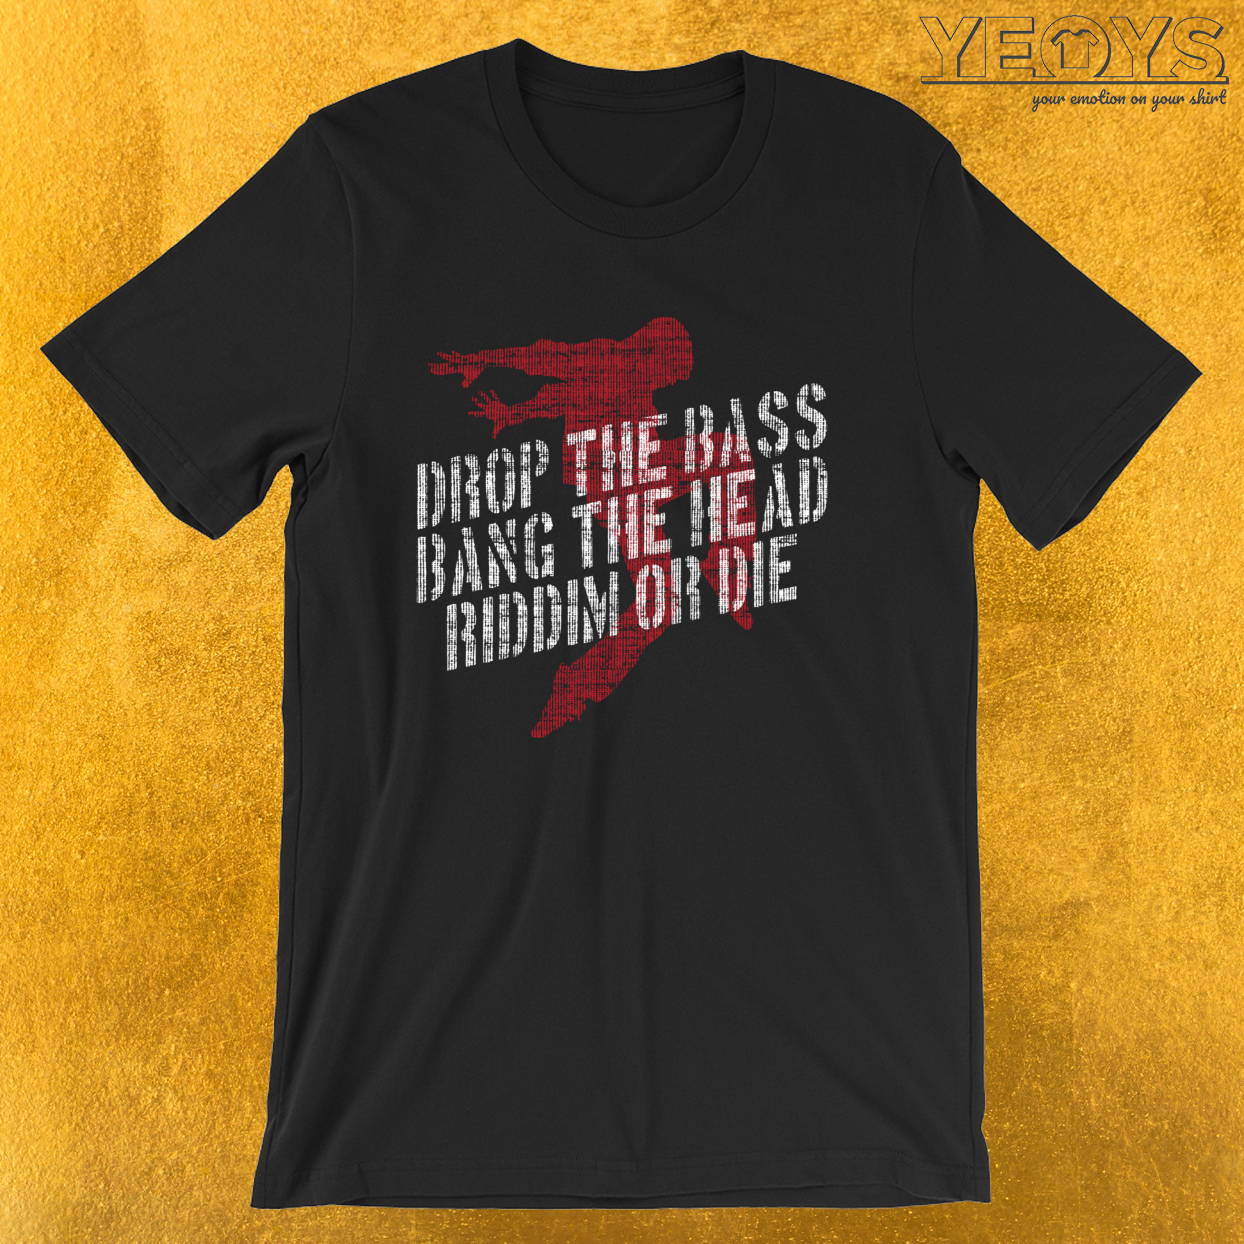 Drop The Bass Bang The Head Riddim Or Die – Dubstep Quotes Tee